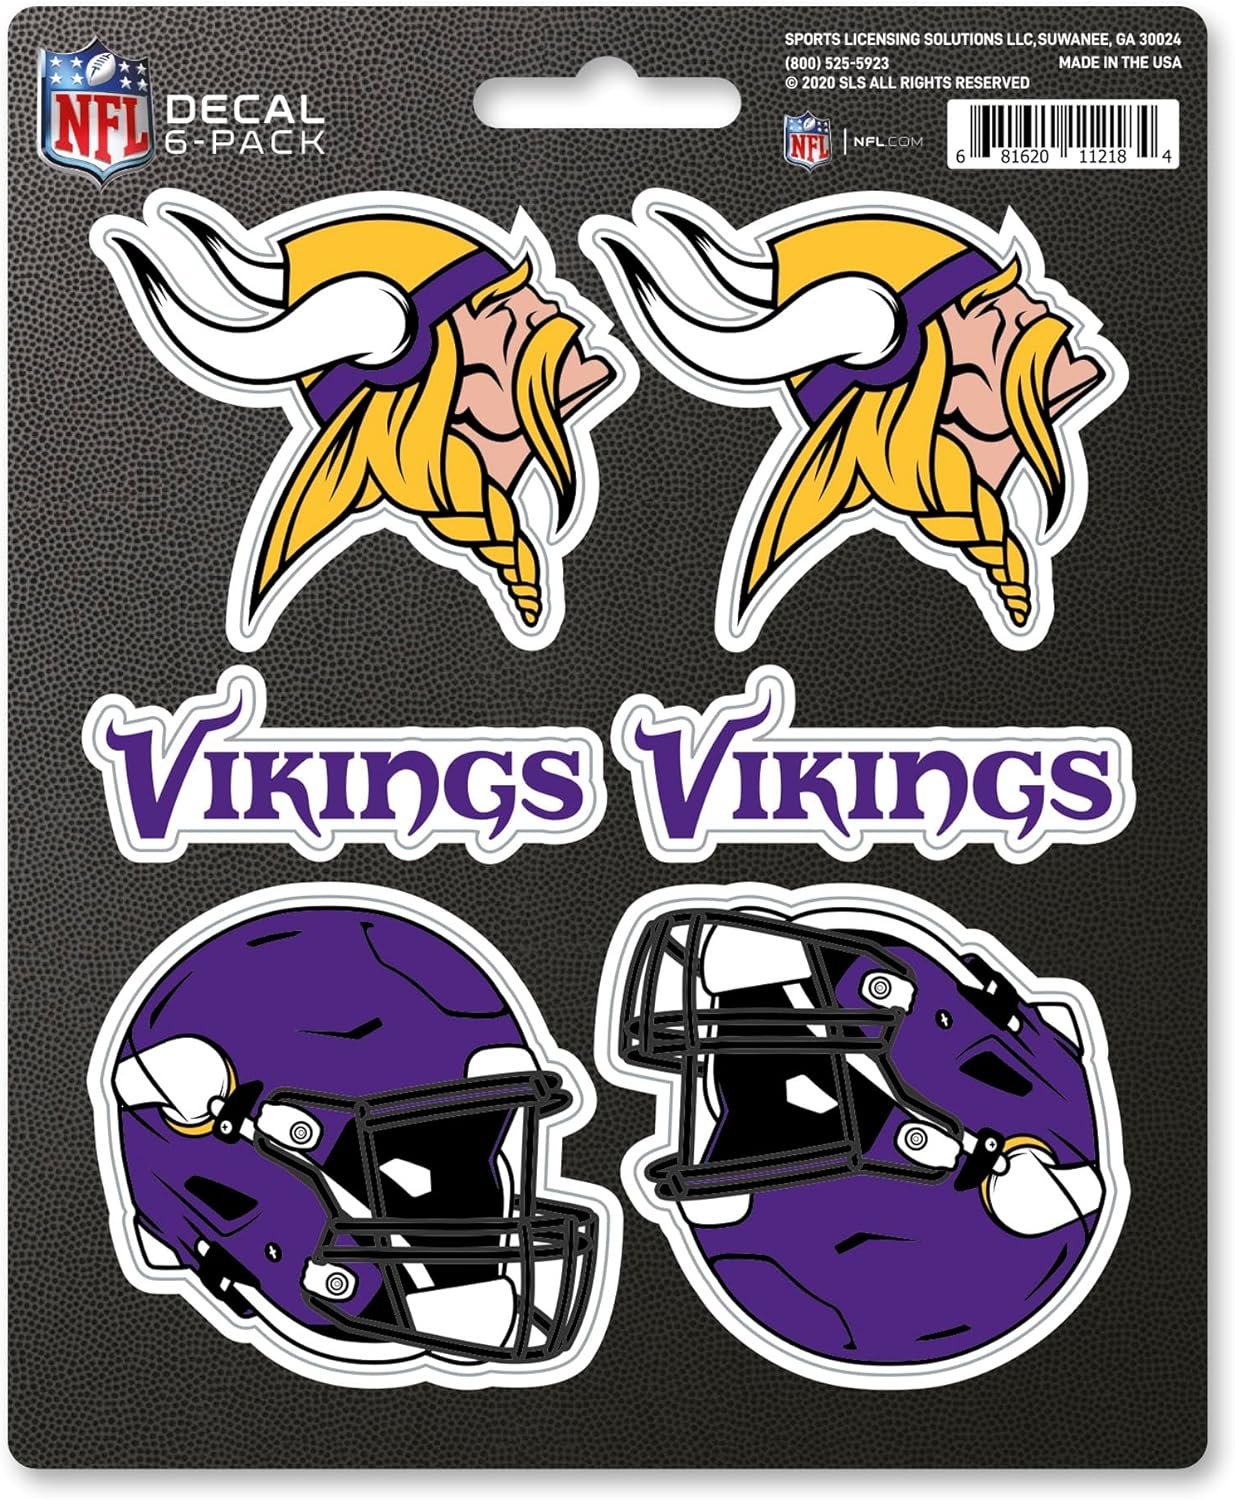 Minnesota Vikings 6-Piece Decal Sticker Set, 5x6 Inch Sheet, Gift for football fans for any hard surfaces around home, automotive, personal items